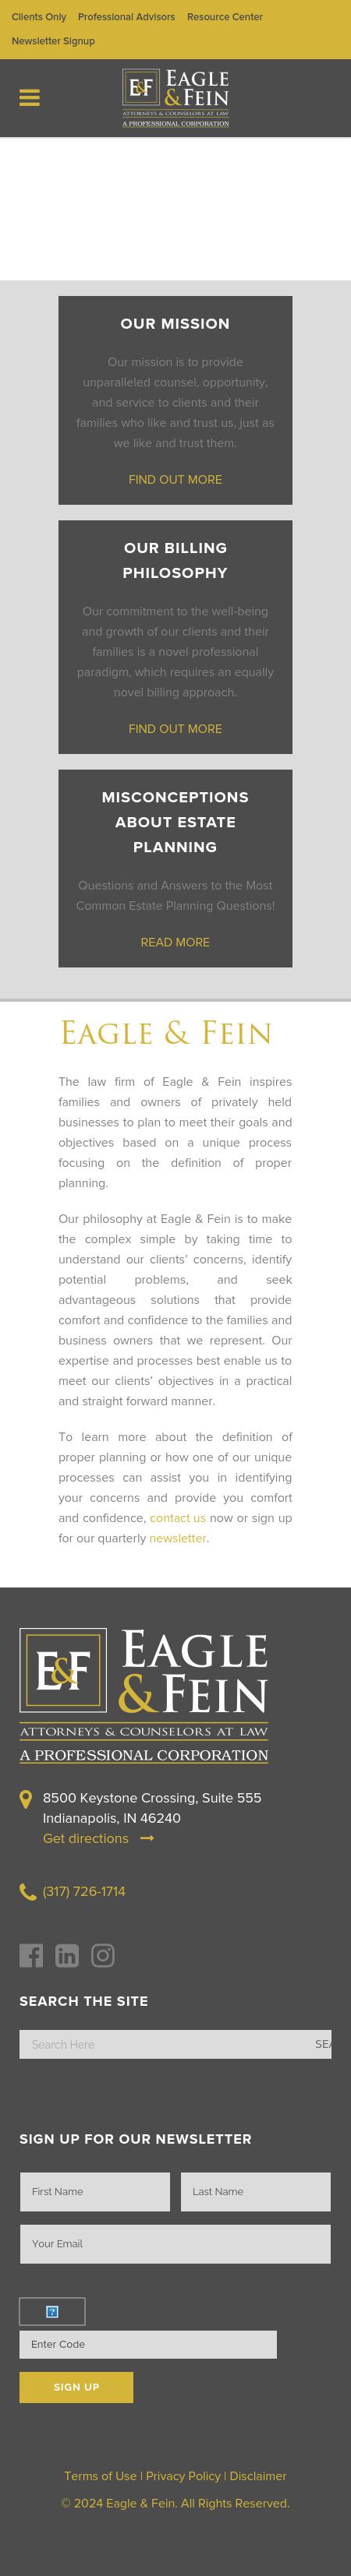 Eagle & Fein - Indianapolis IN Lawyers